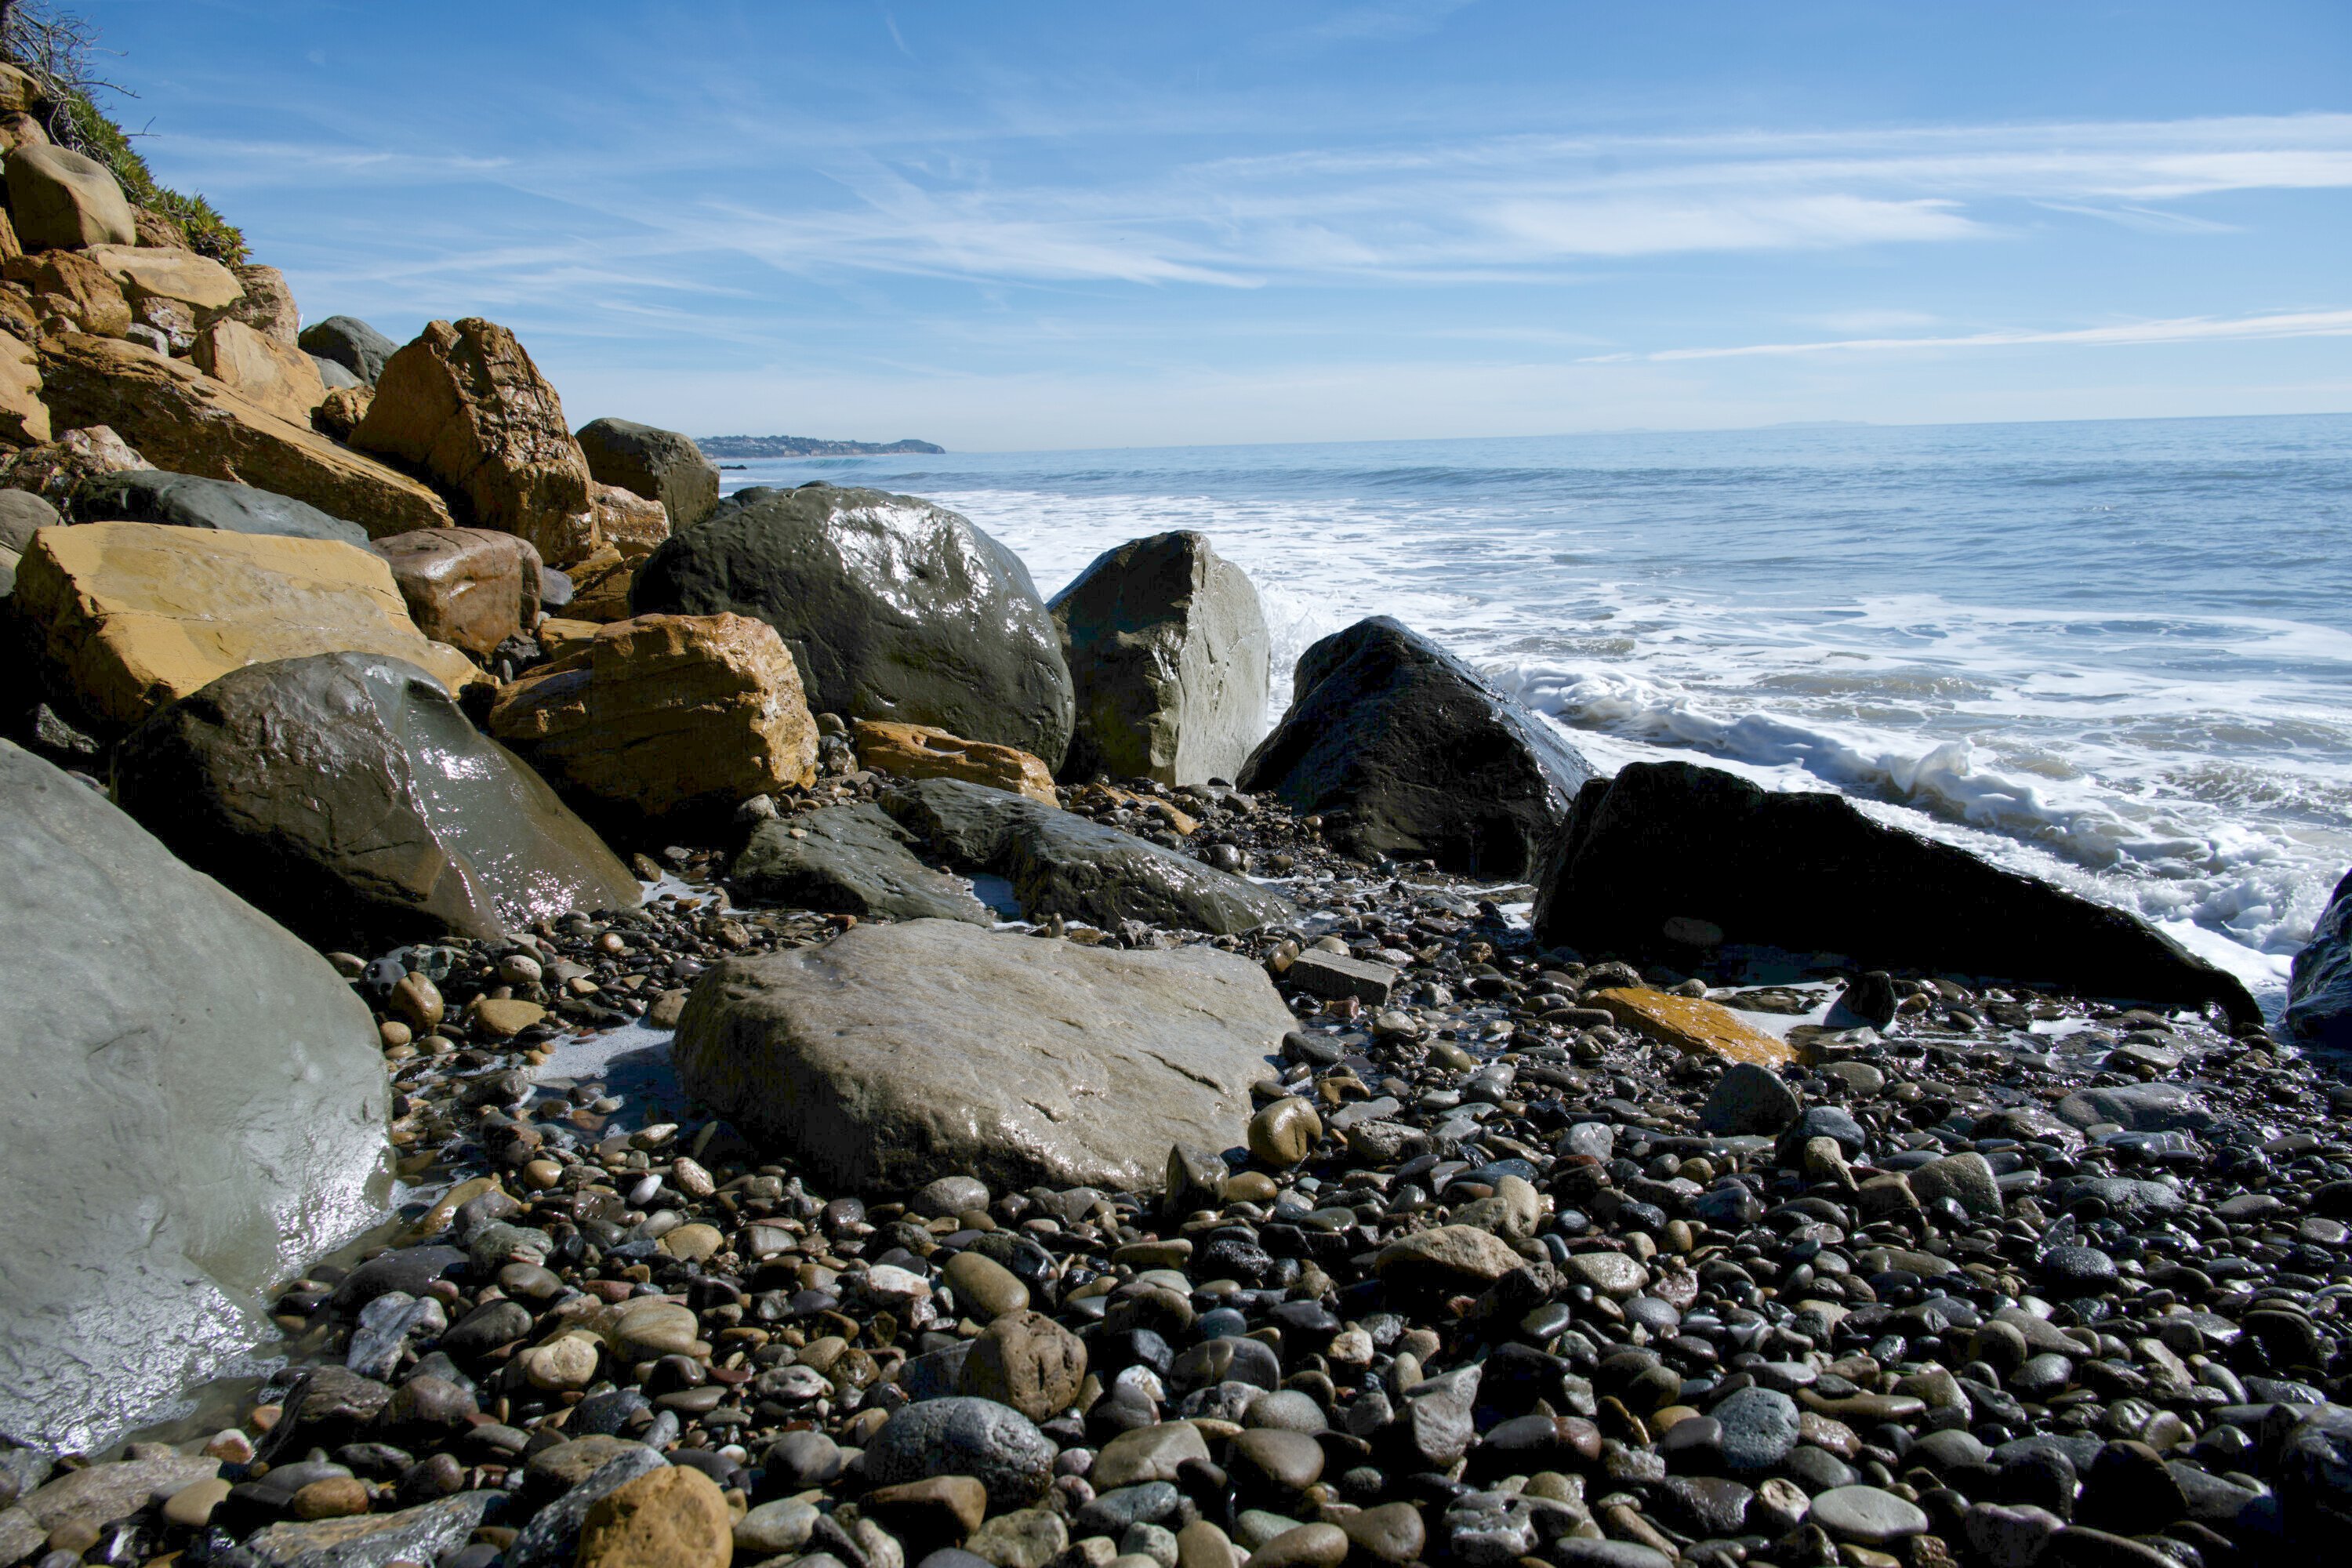 Golden and gray rocks scattered along Malibu Beach with gentle waves in the background on a sunny winter day.